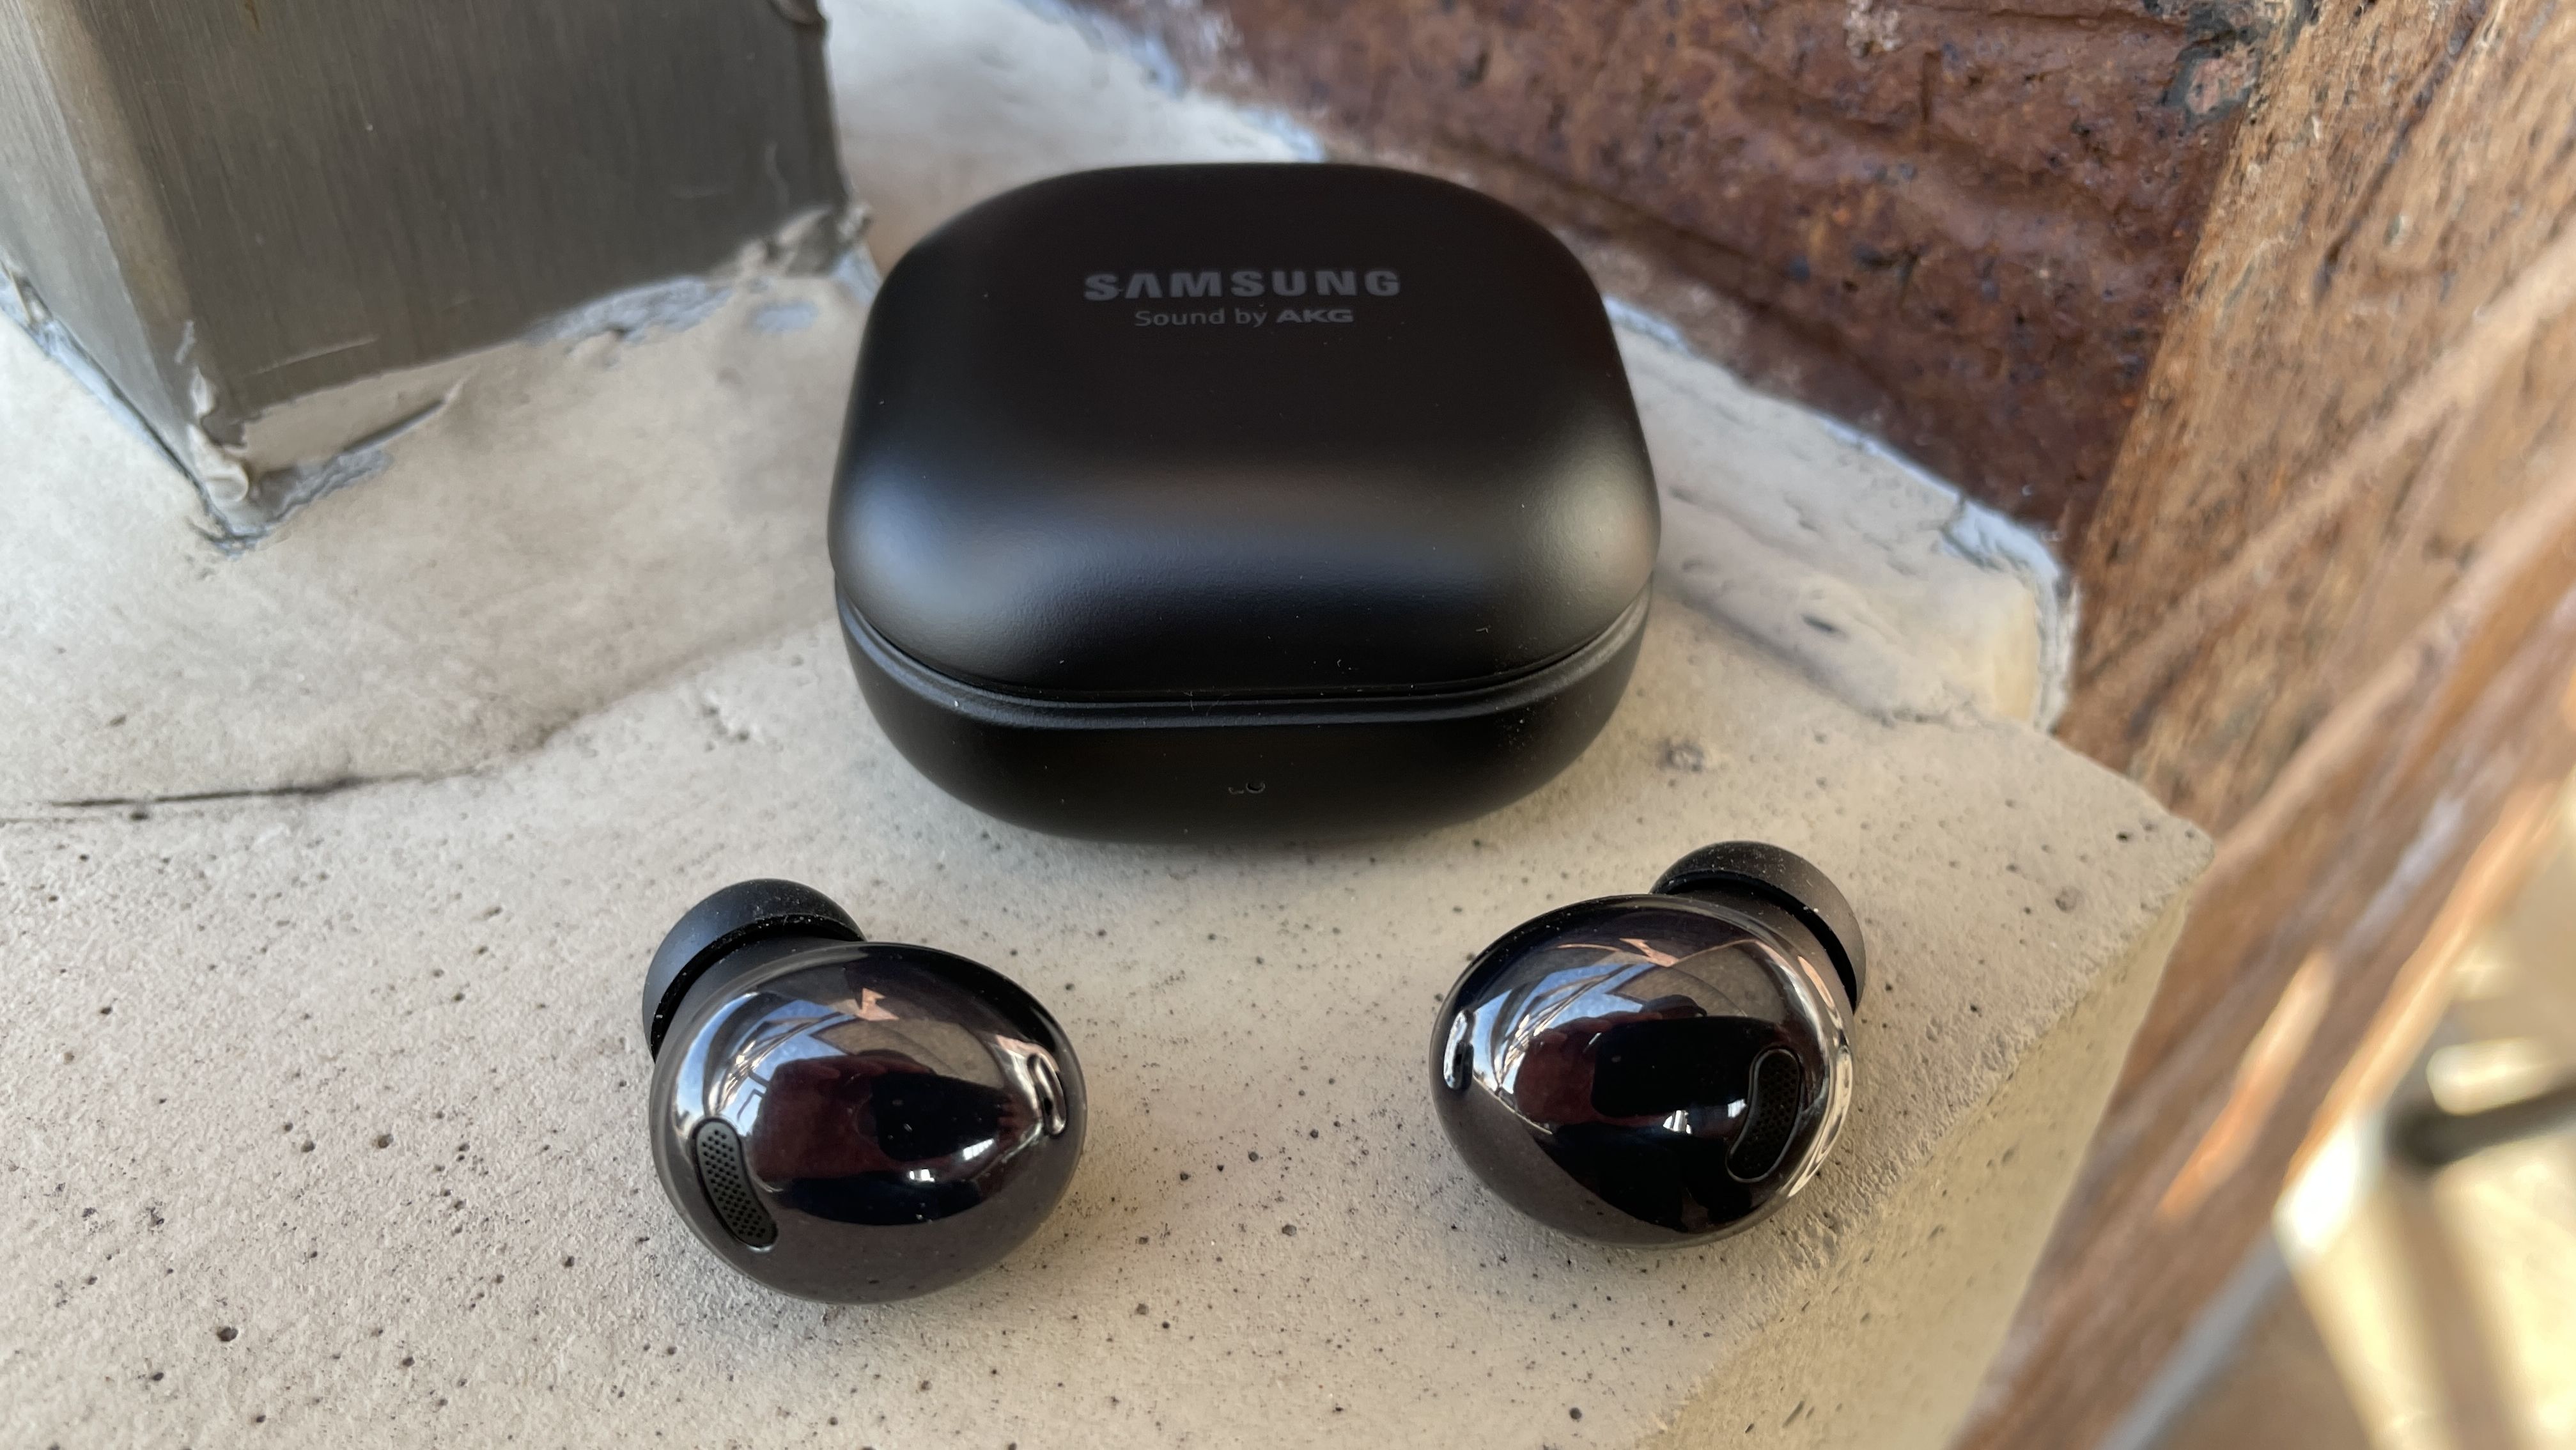 Samsung Galaxy Buds review: great for Android owners